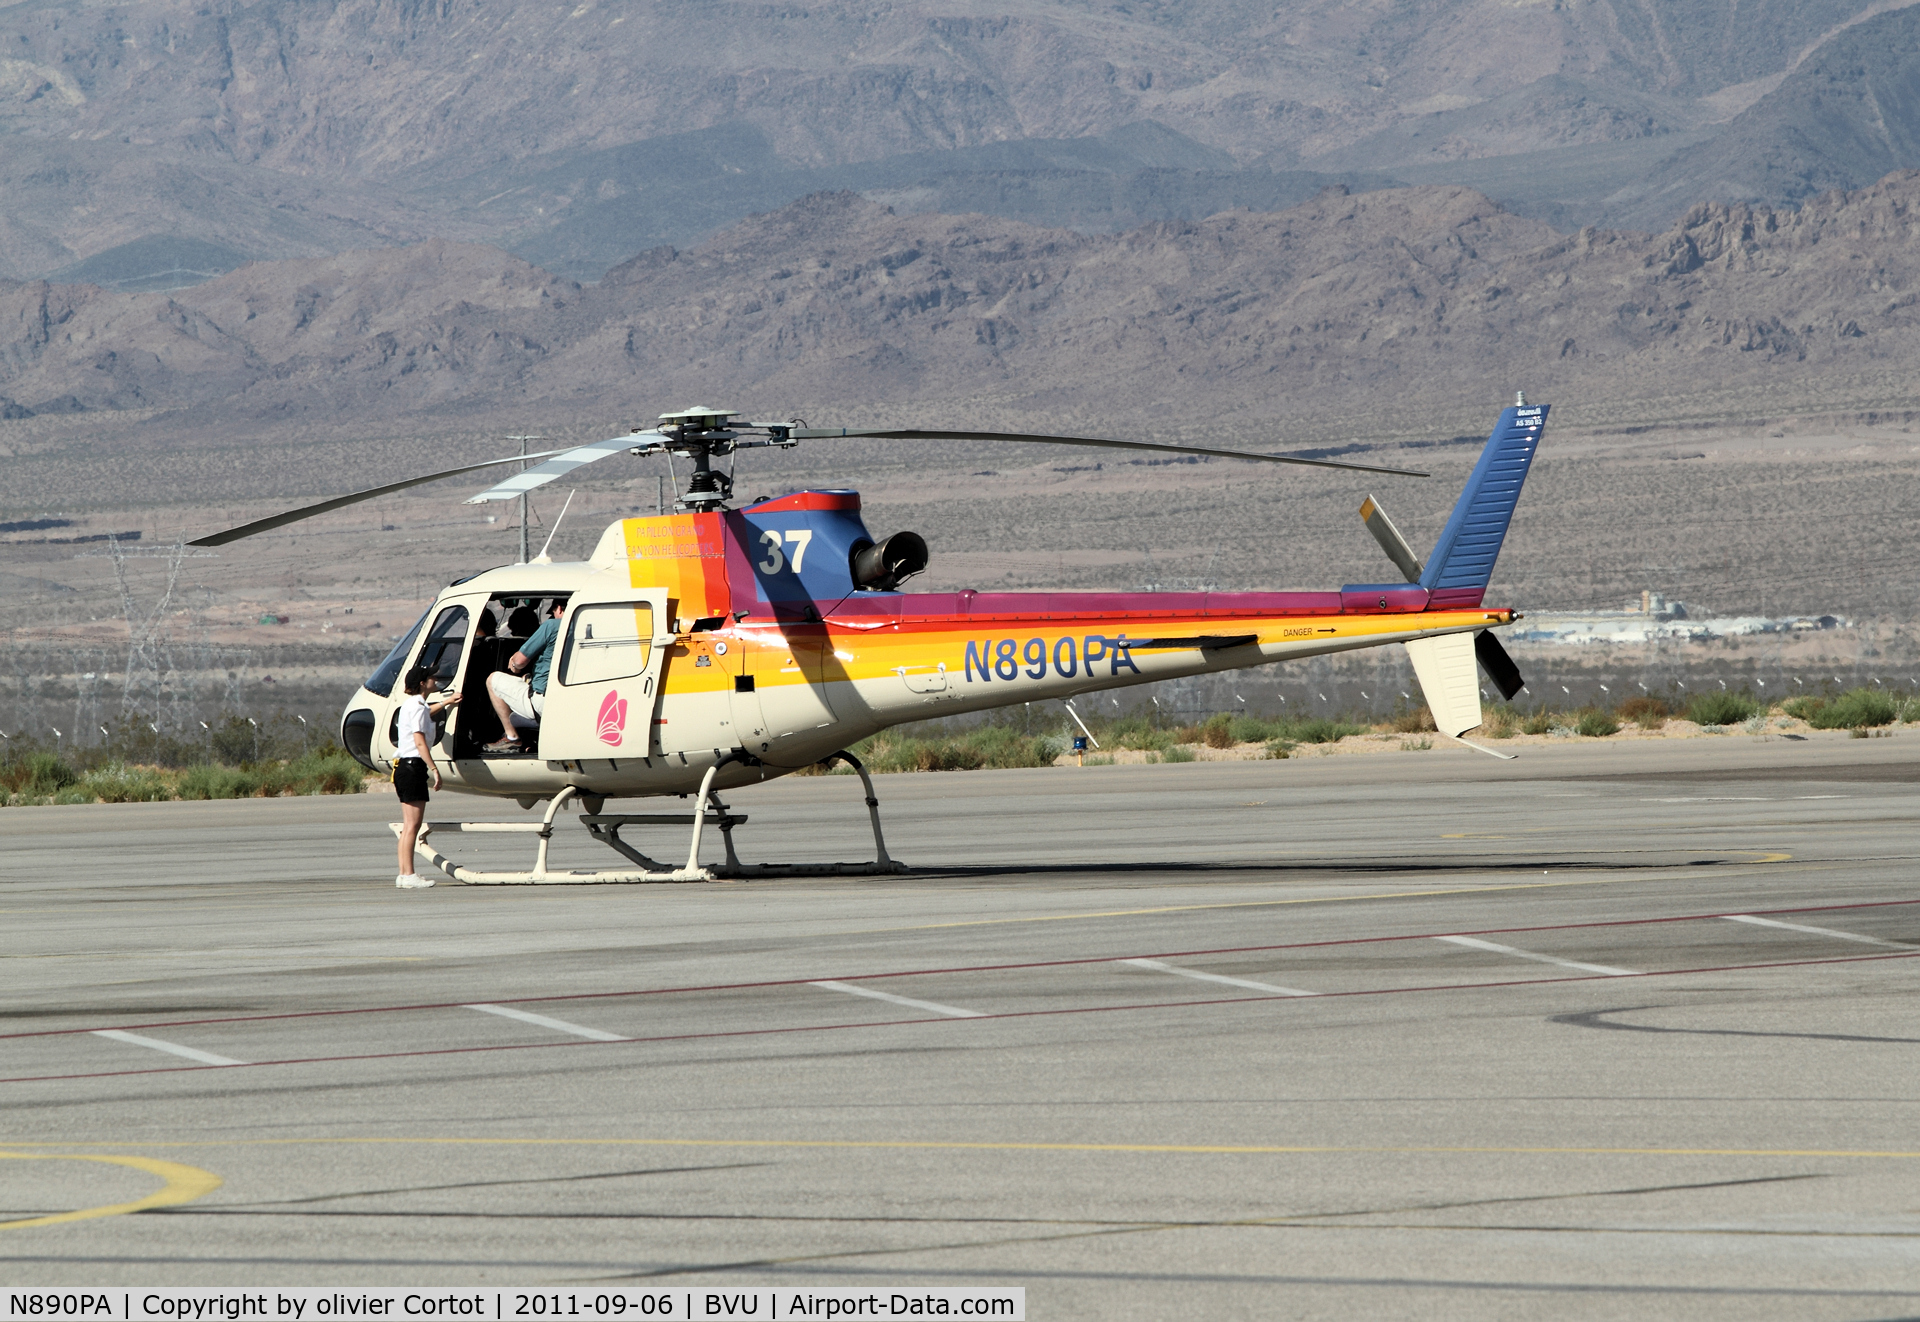 N890PA, 2008 Eurocopter AS-350B-2 Ecureuil Ecureuil C/N 4554, One of the last AS350B2 at Boulder city